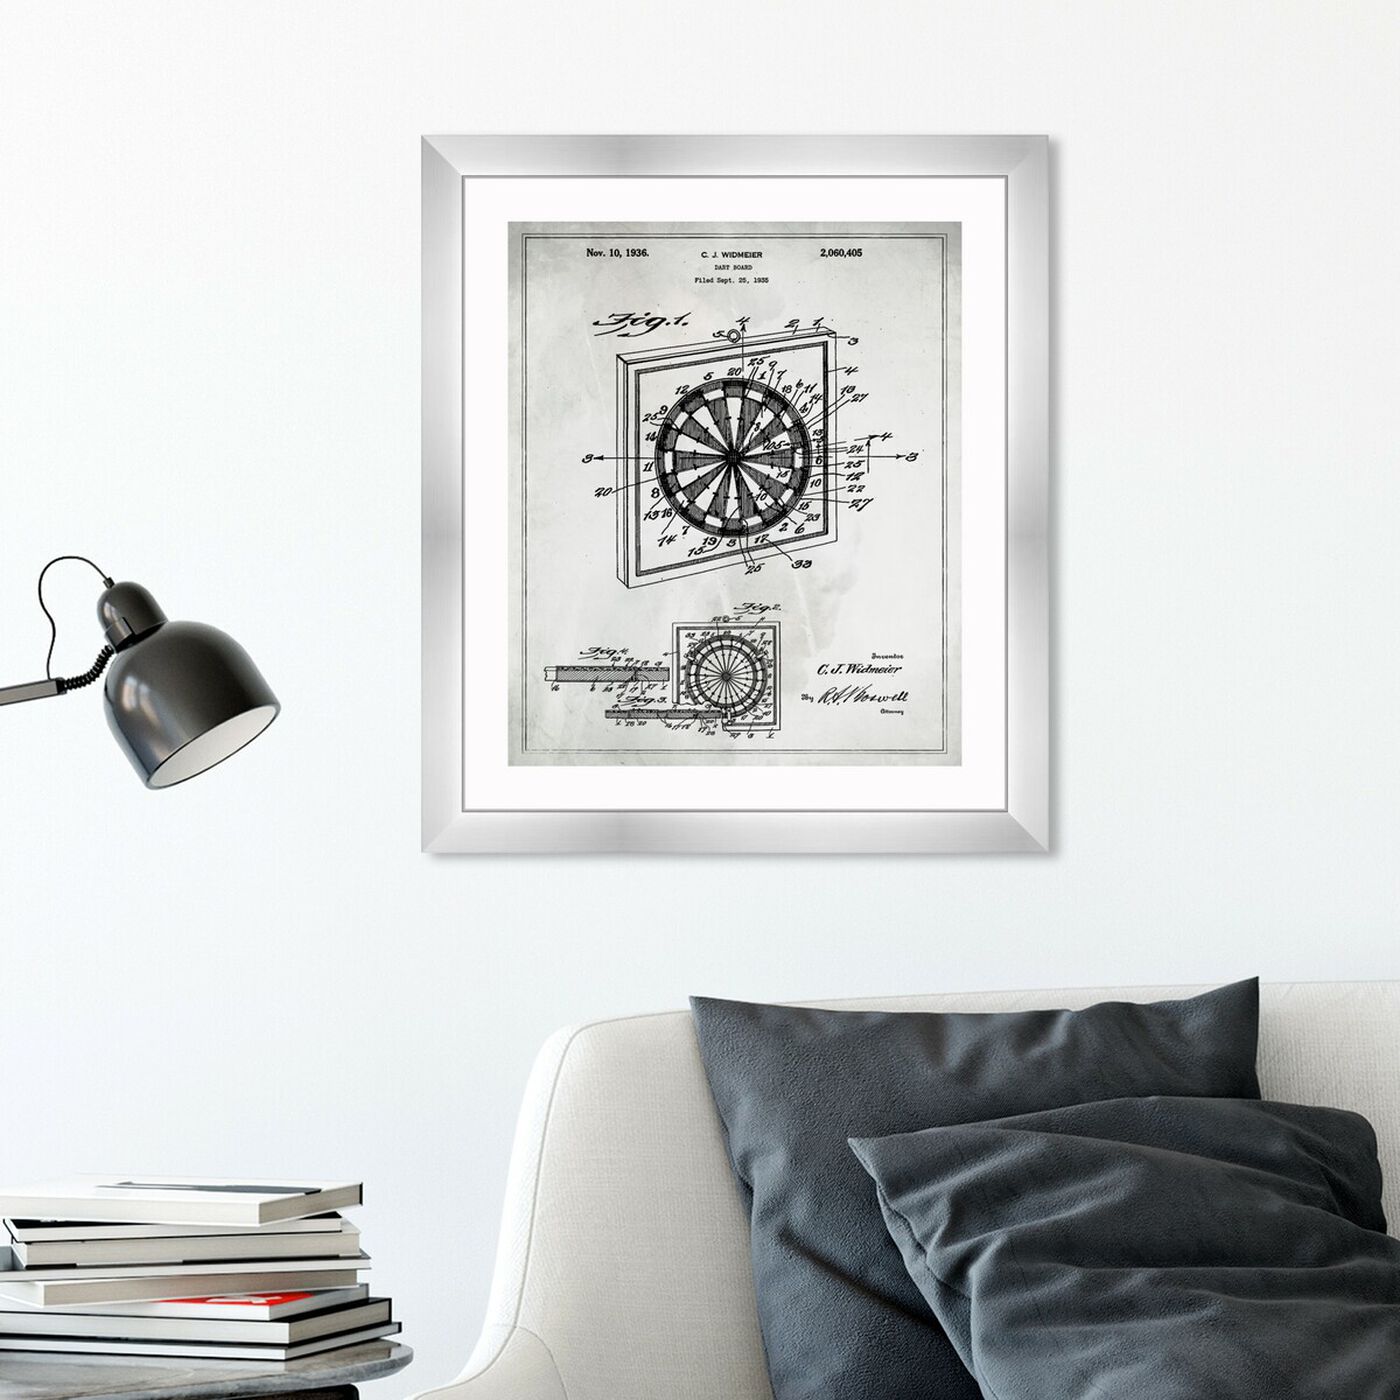 Hanging view of Dart Board 1936 featuring entertainment and hobbies and darts art.